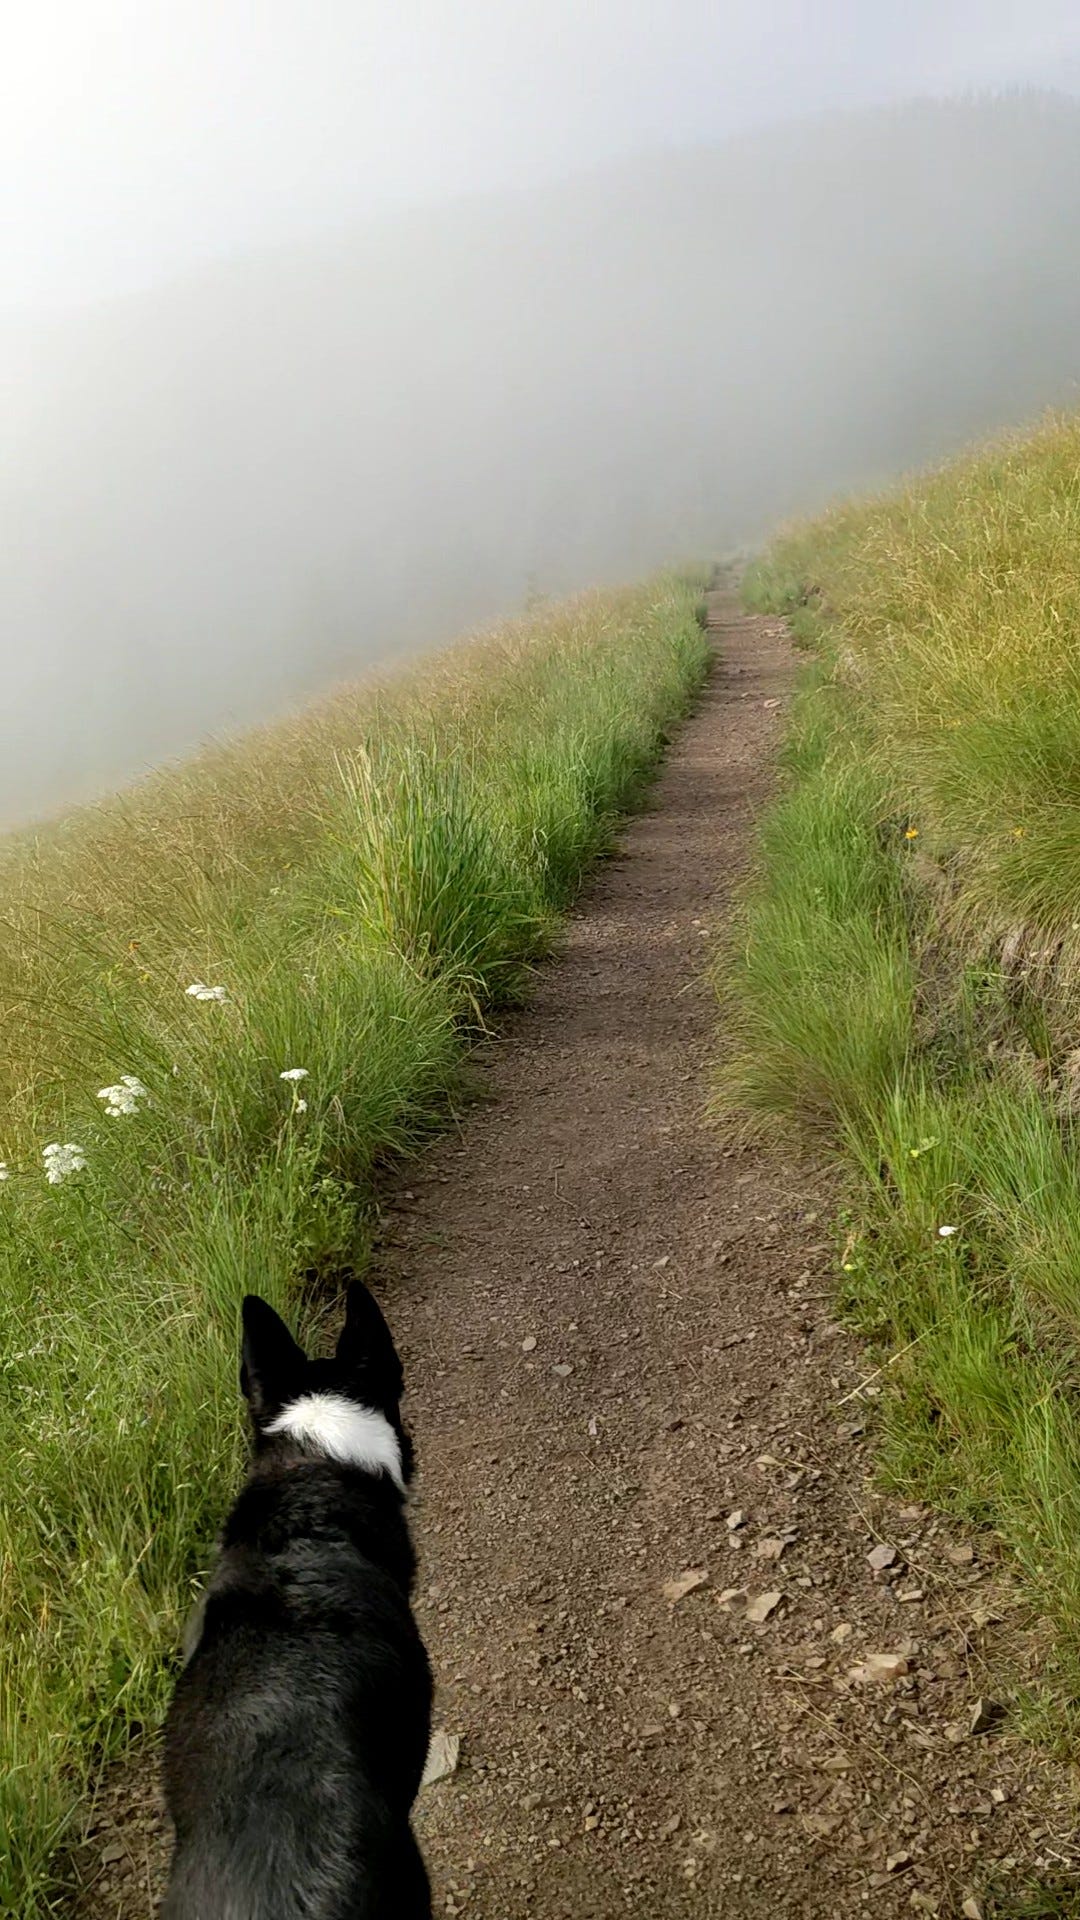 Dog on trail ascending through meadow